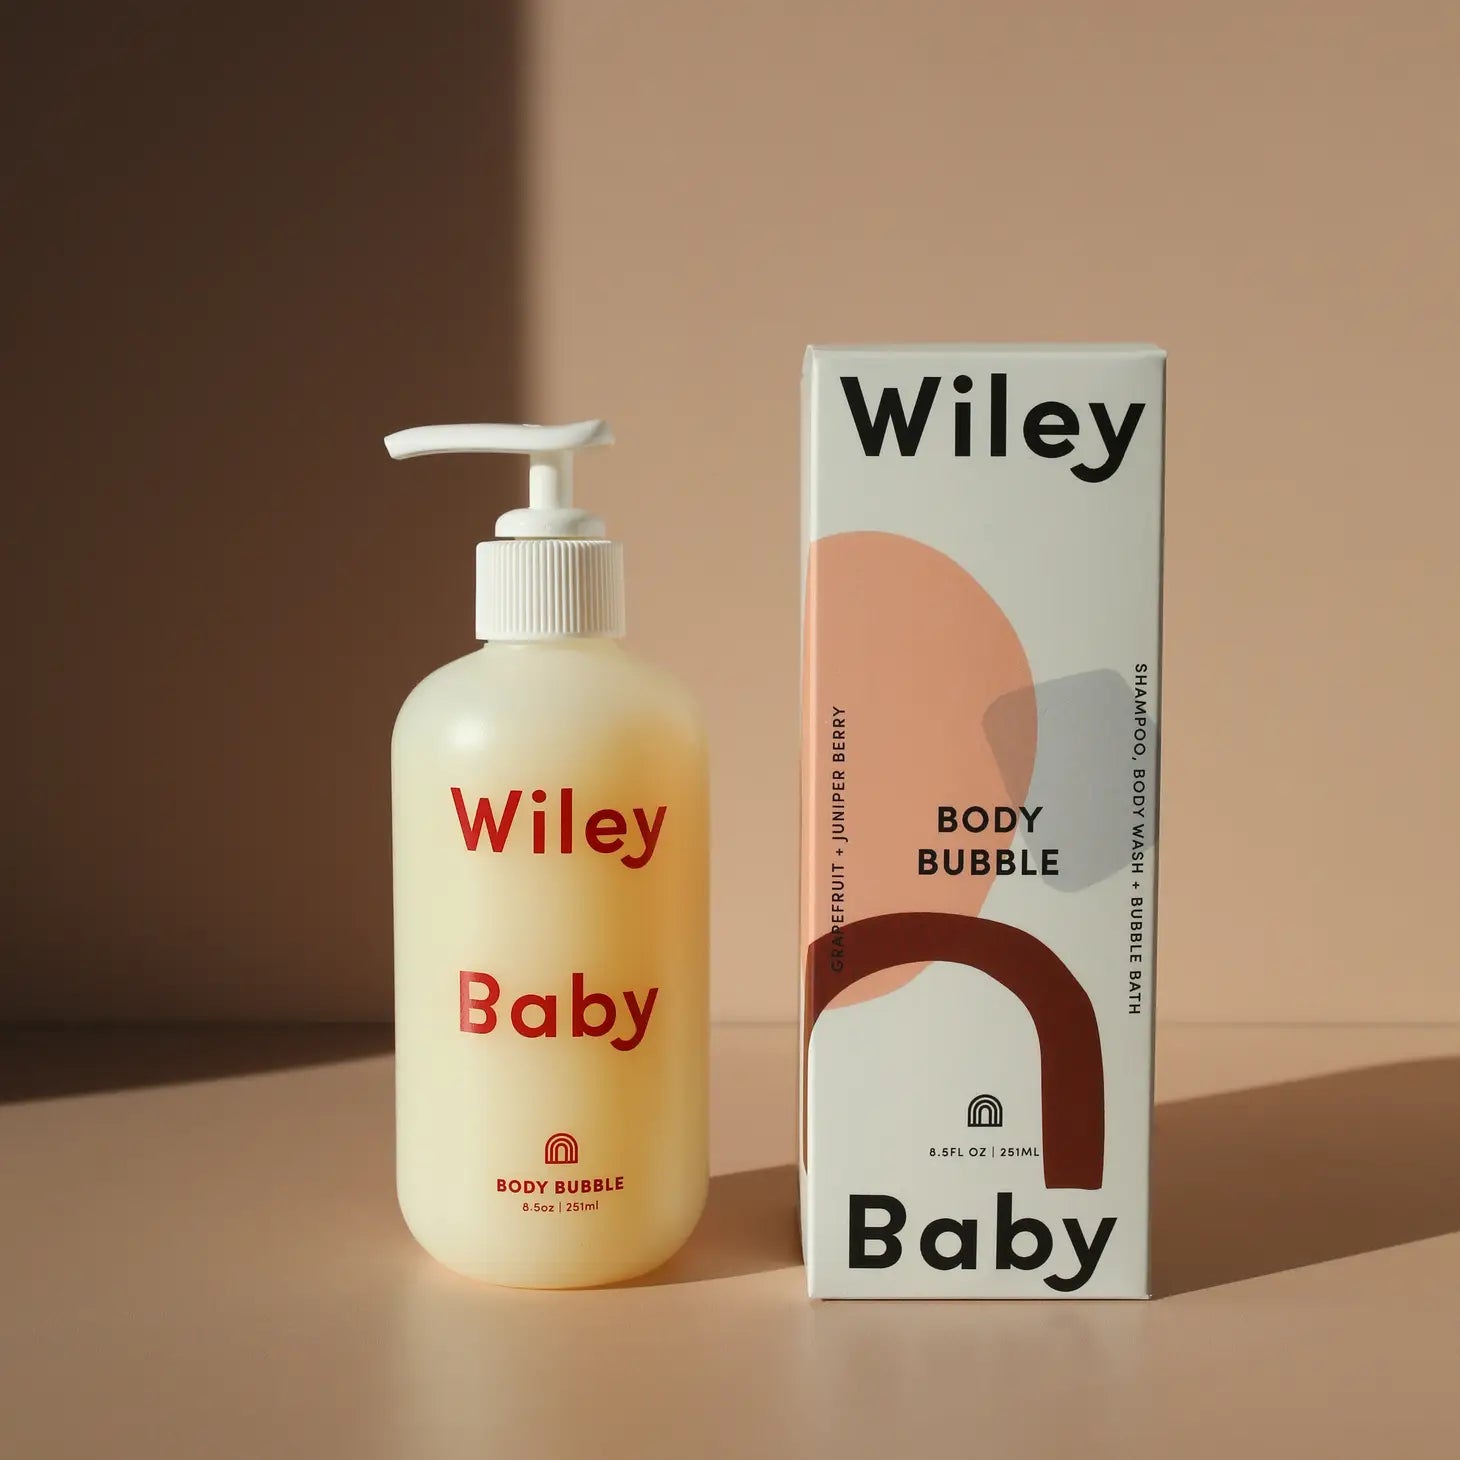 Body Bubble | Wiley Baby